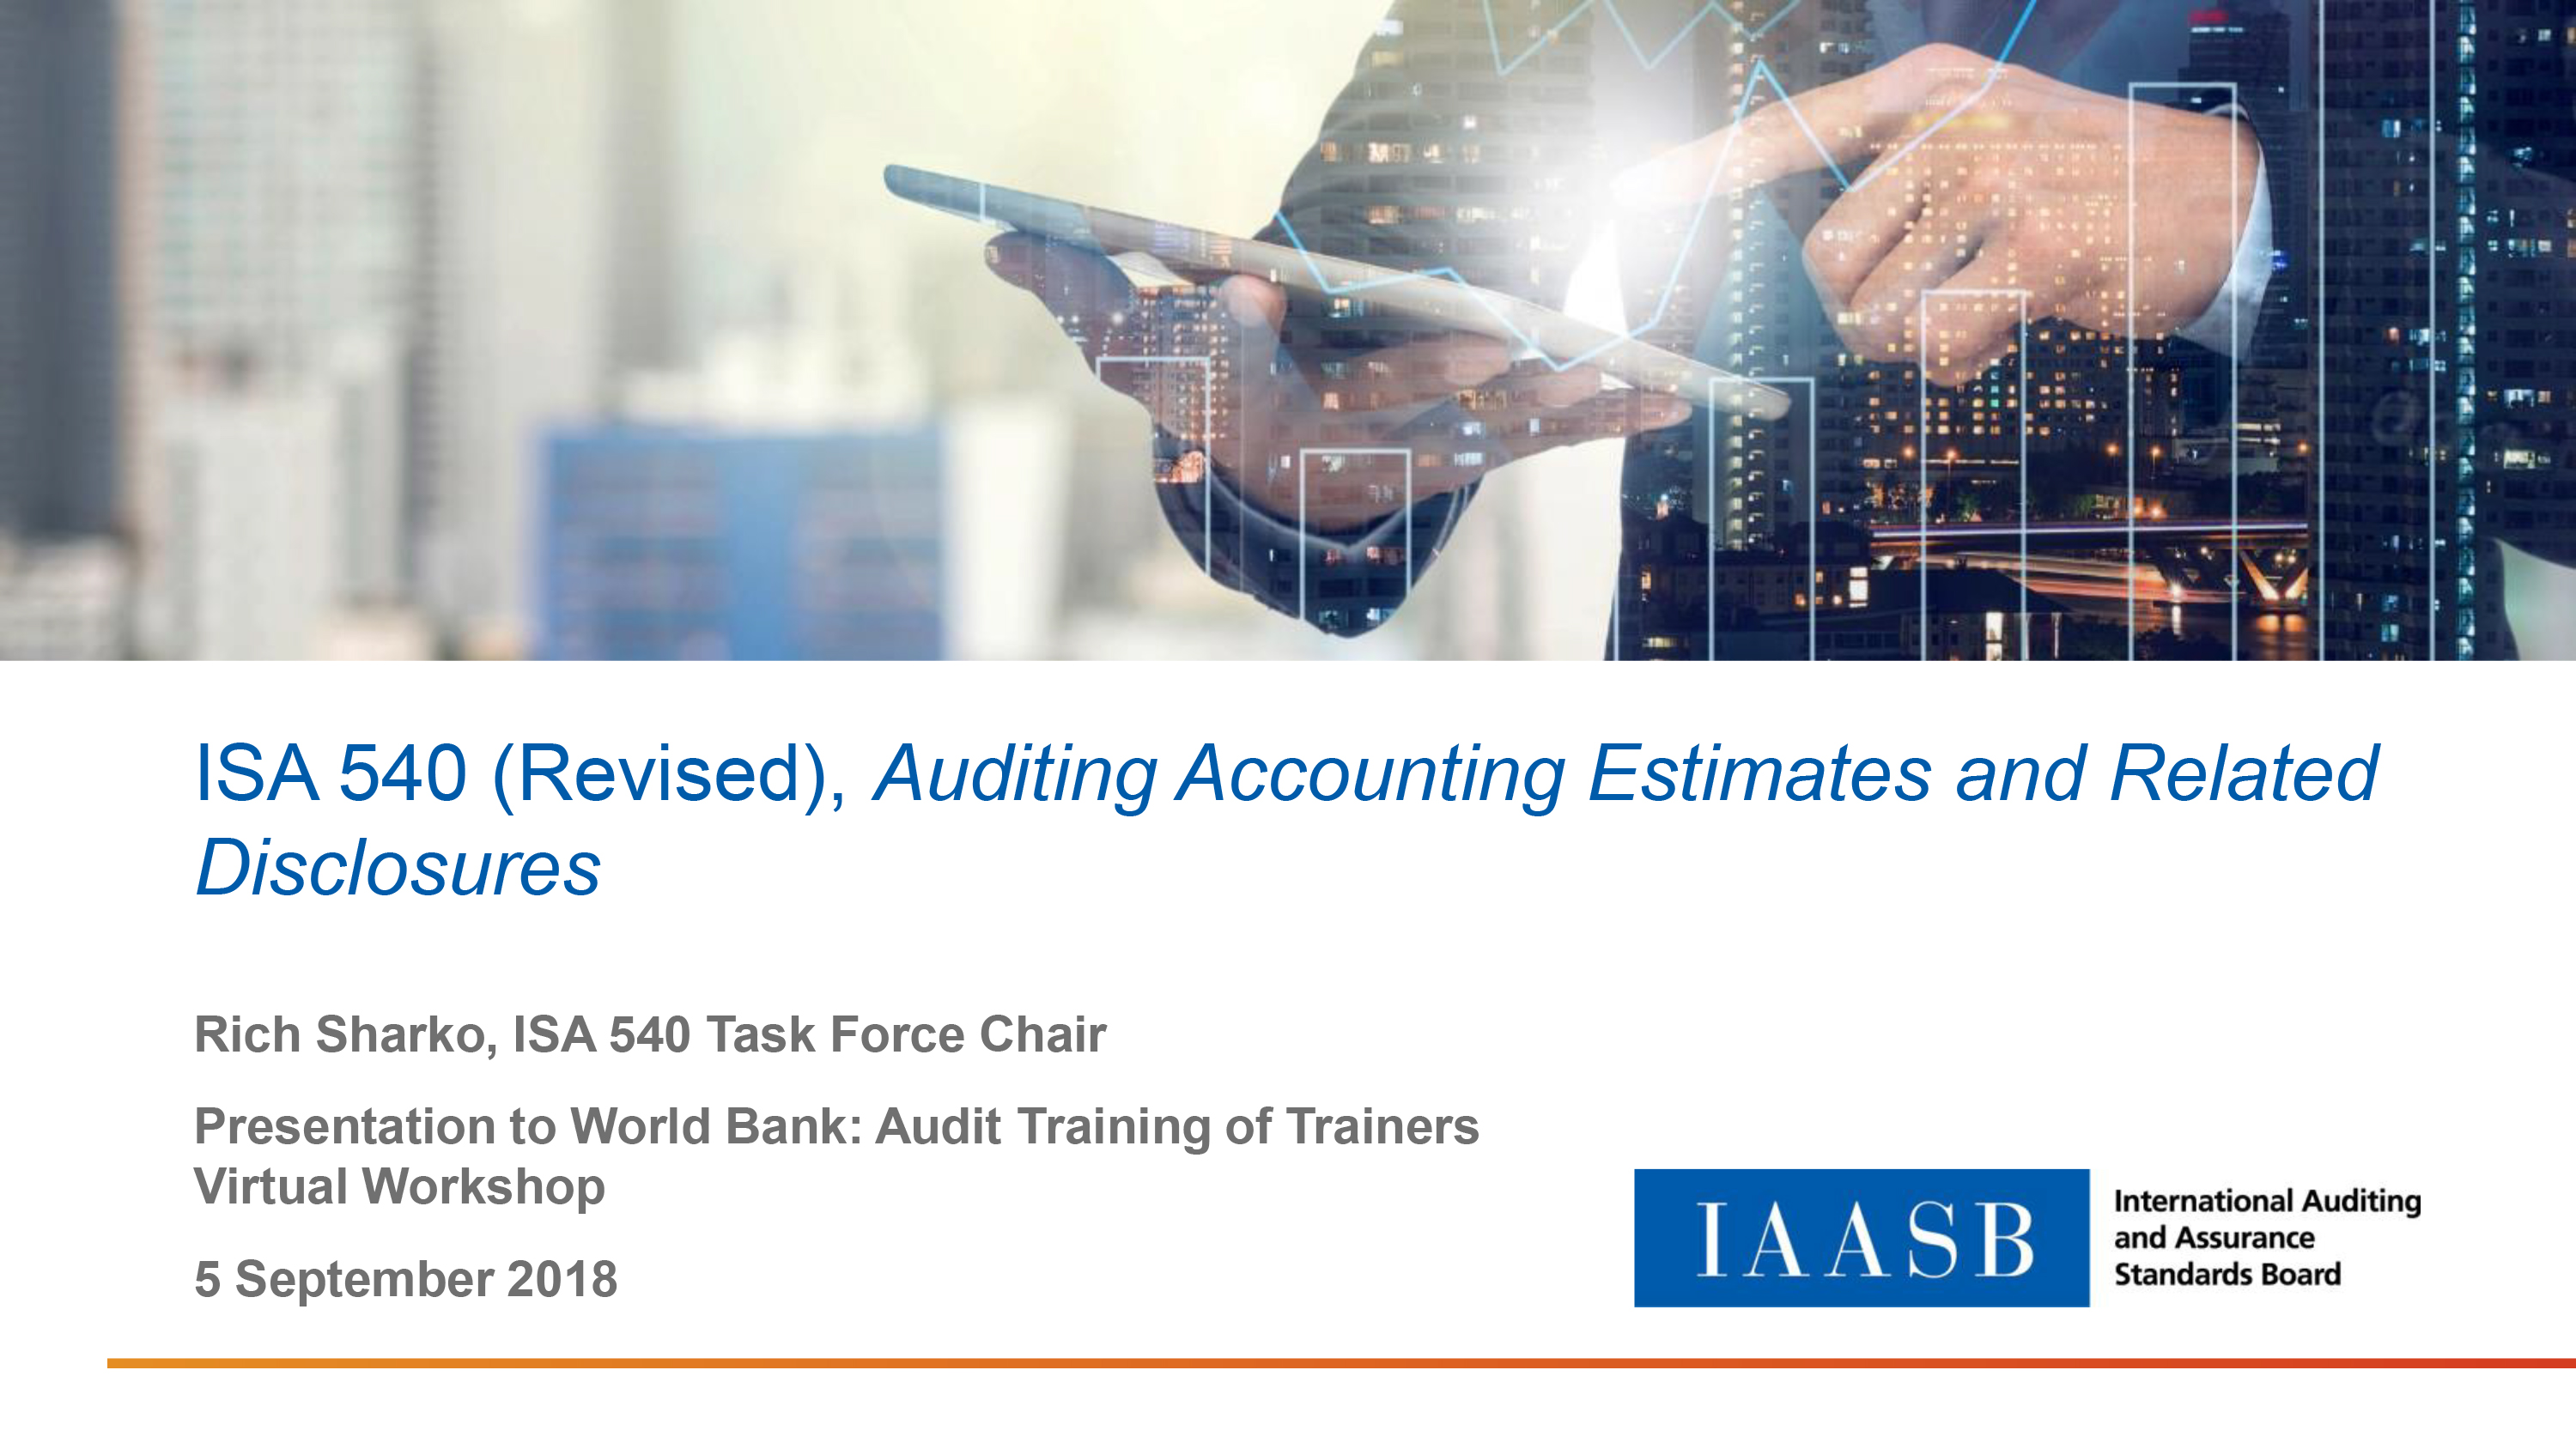 ISA 540 (Revised), Auditing Accounting Estimates and Related Disclosures 